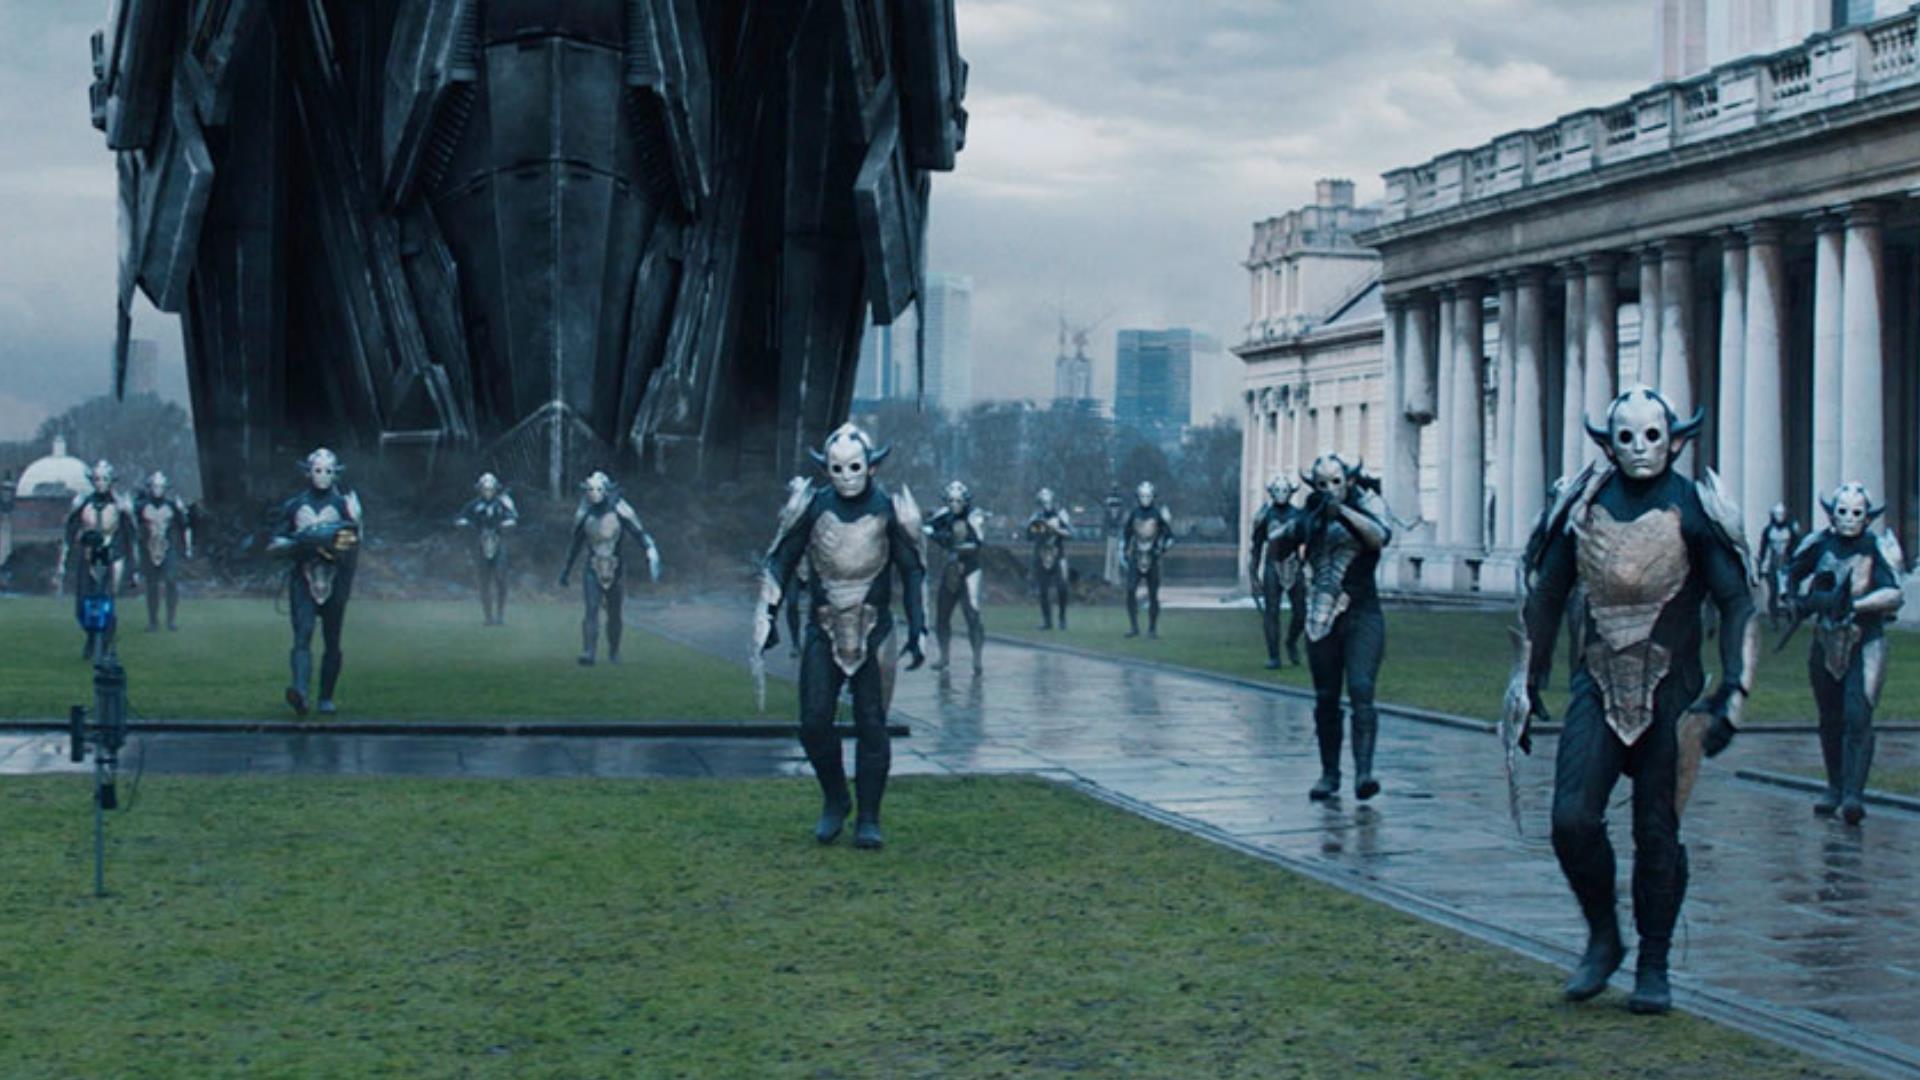 Film and TV locations in Greenwich. A group of aliens descend on the Old Royal Naval College in Greenwich in Marvel's Thor: The Dark World.